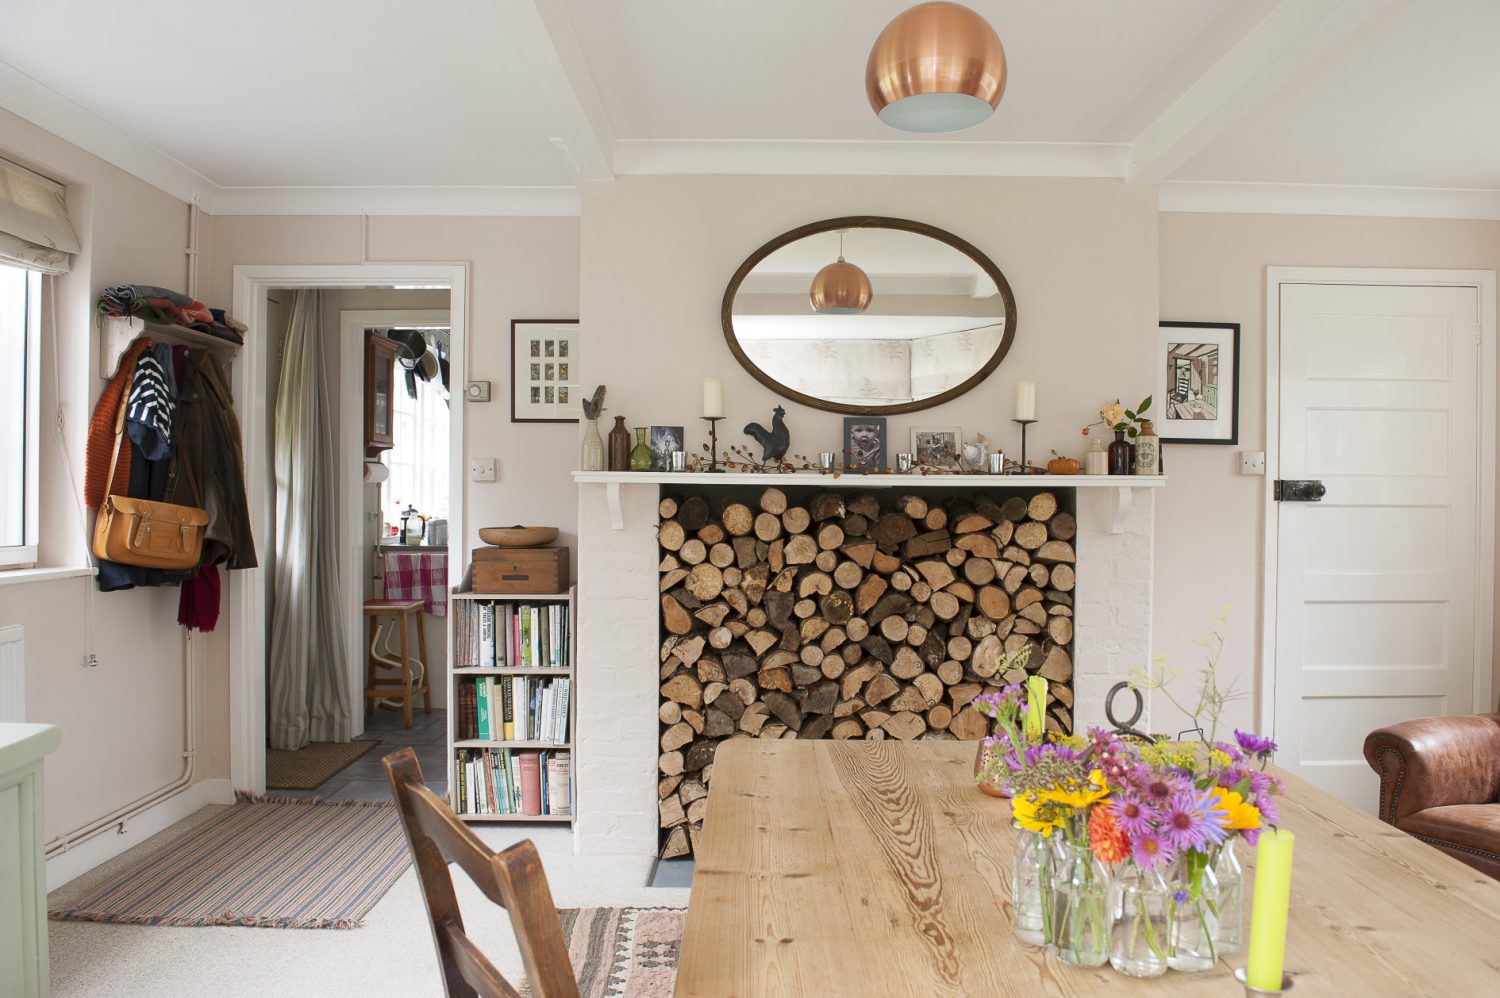 A fireplace which was once home to a kitchen range now acts as the focal point of the front room. A large bay window bathes the room in natural light